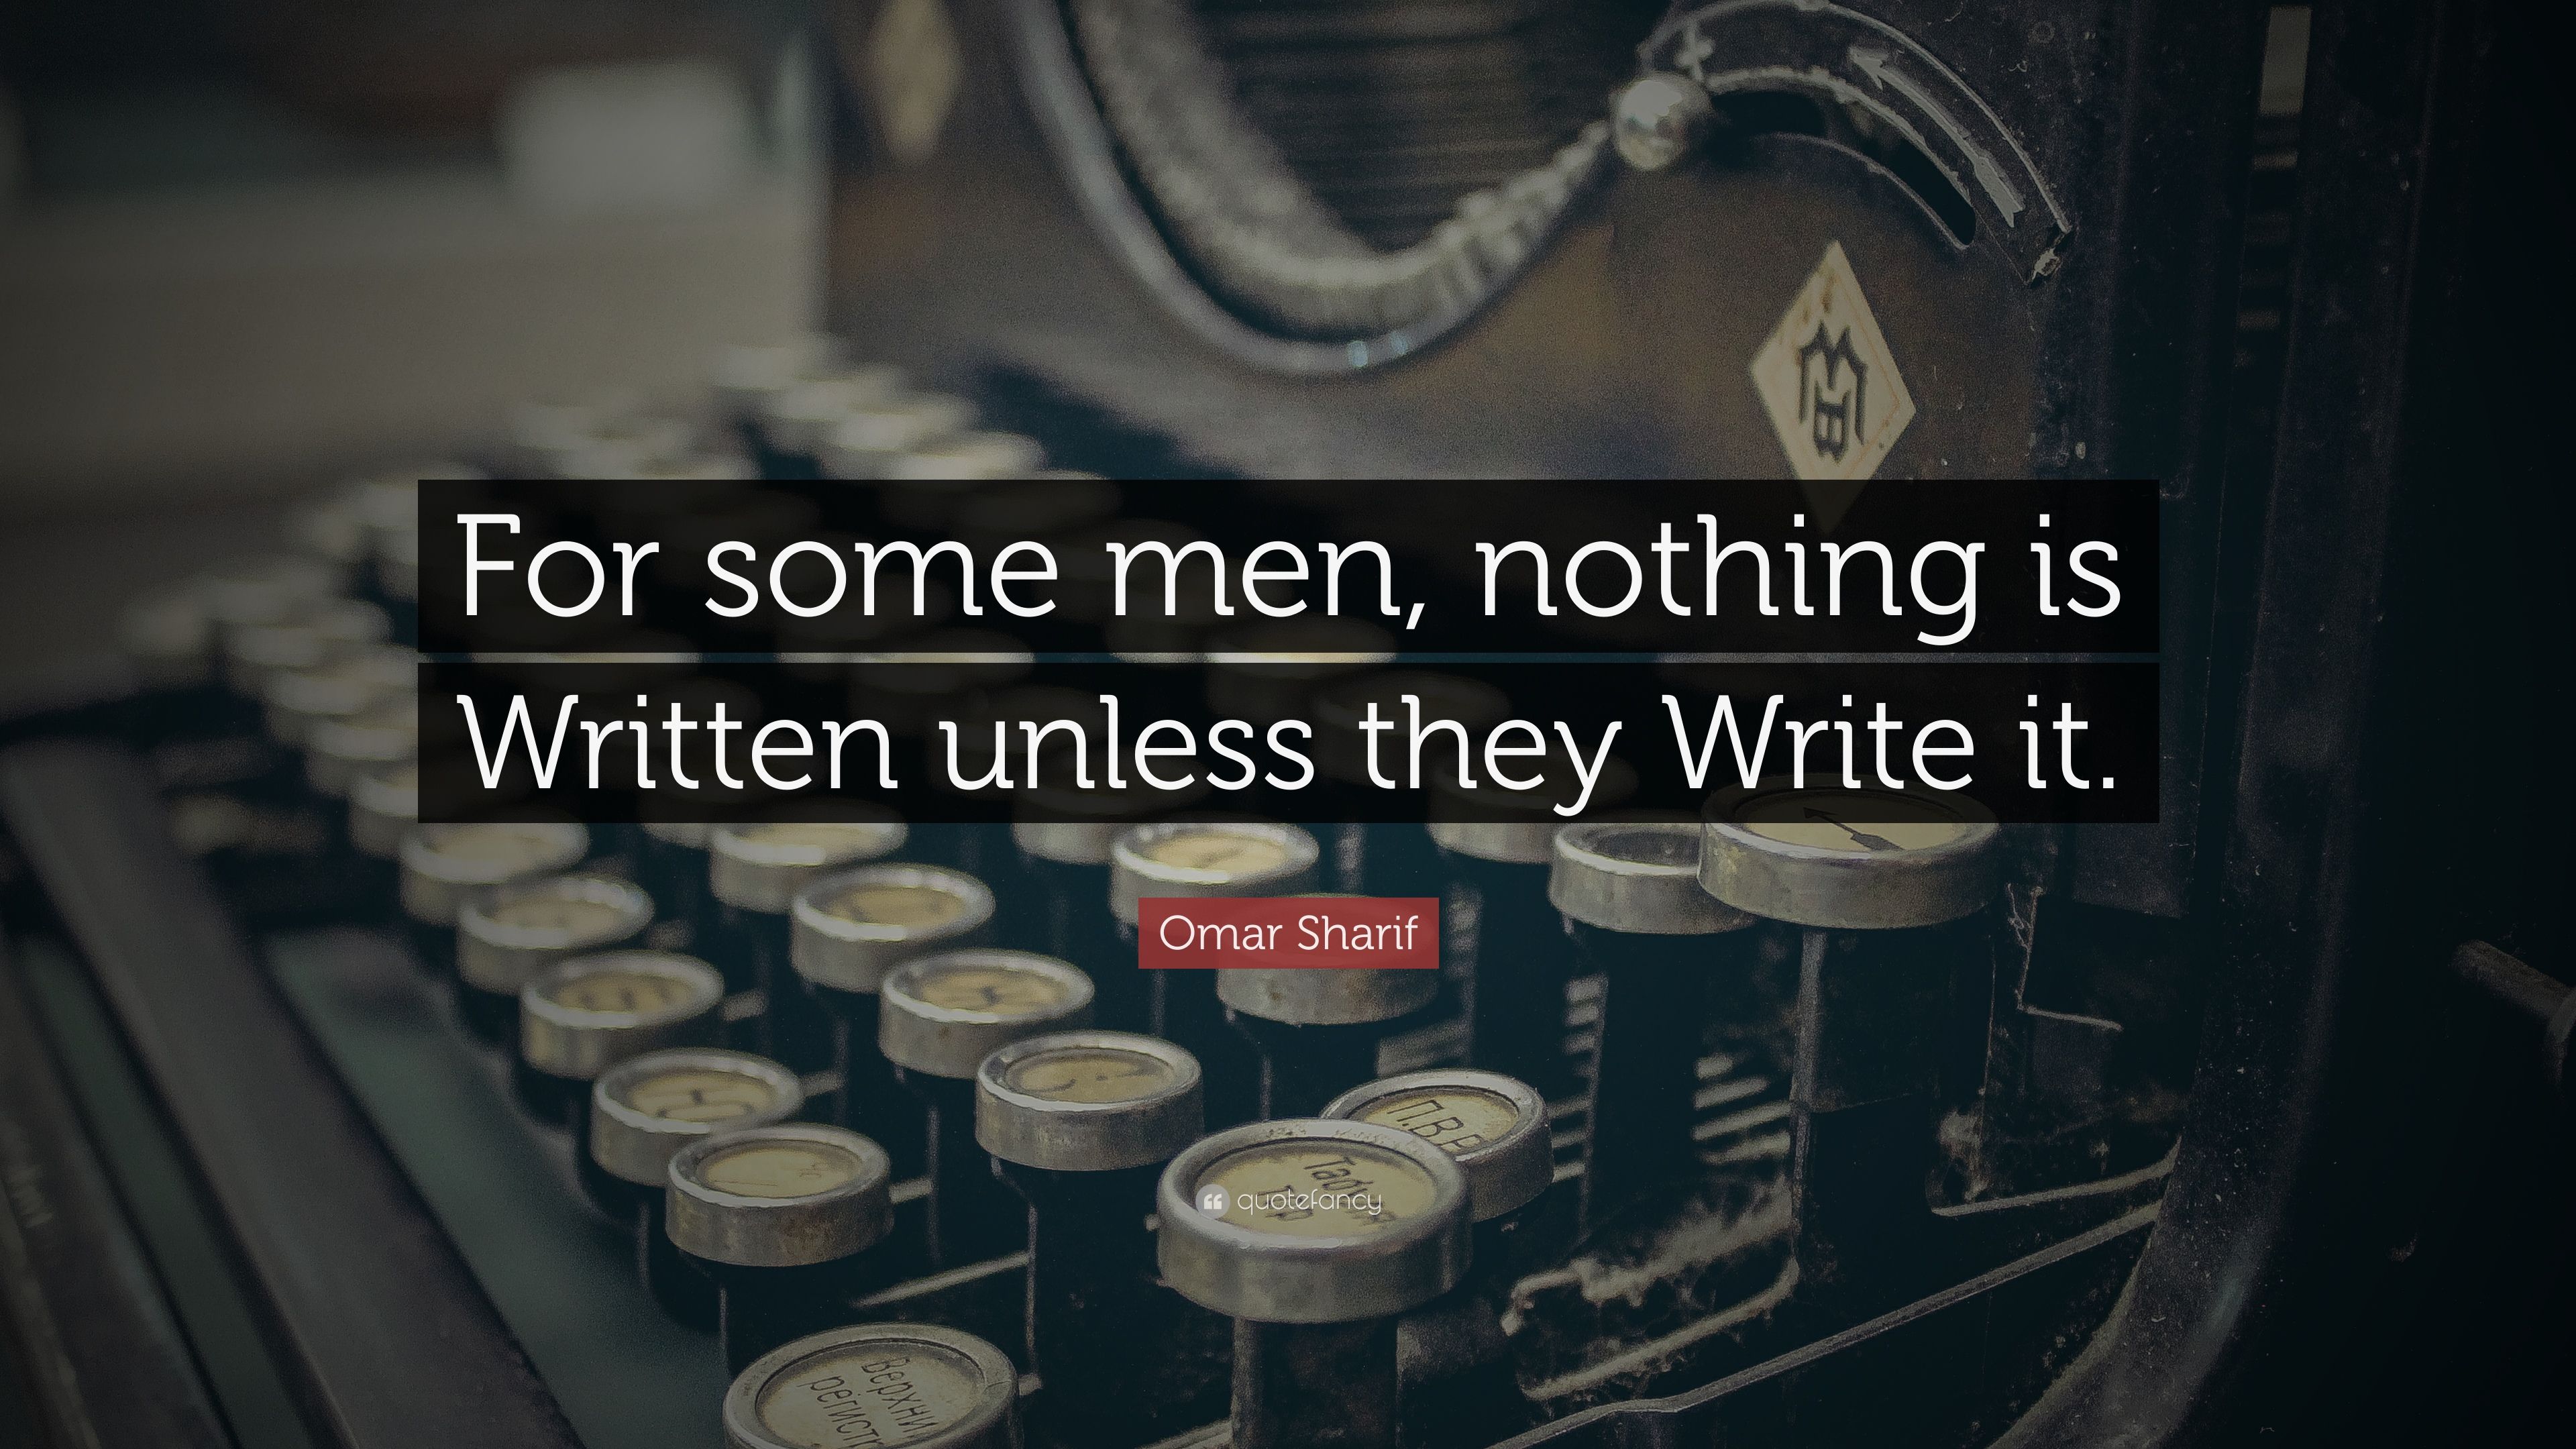 Omar Sharif Quote: "For some men, nothing is Written unless they Write...